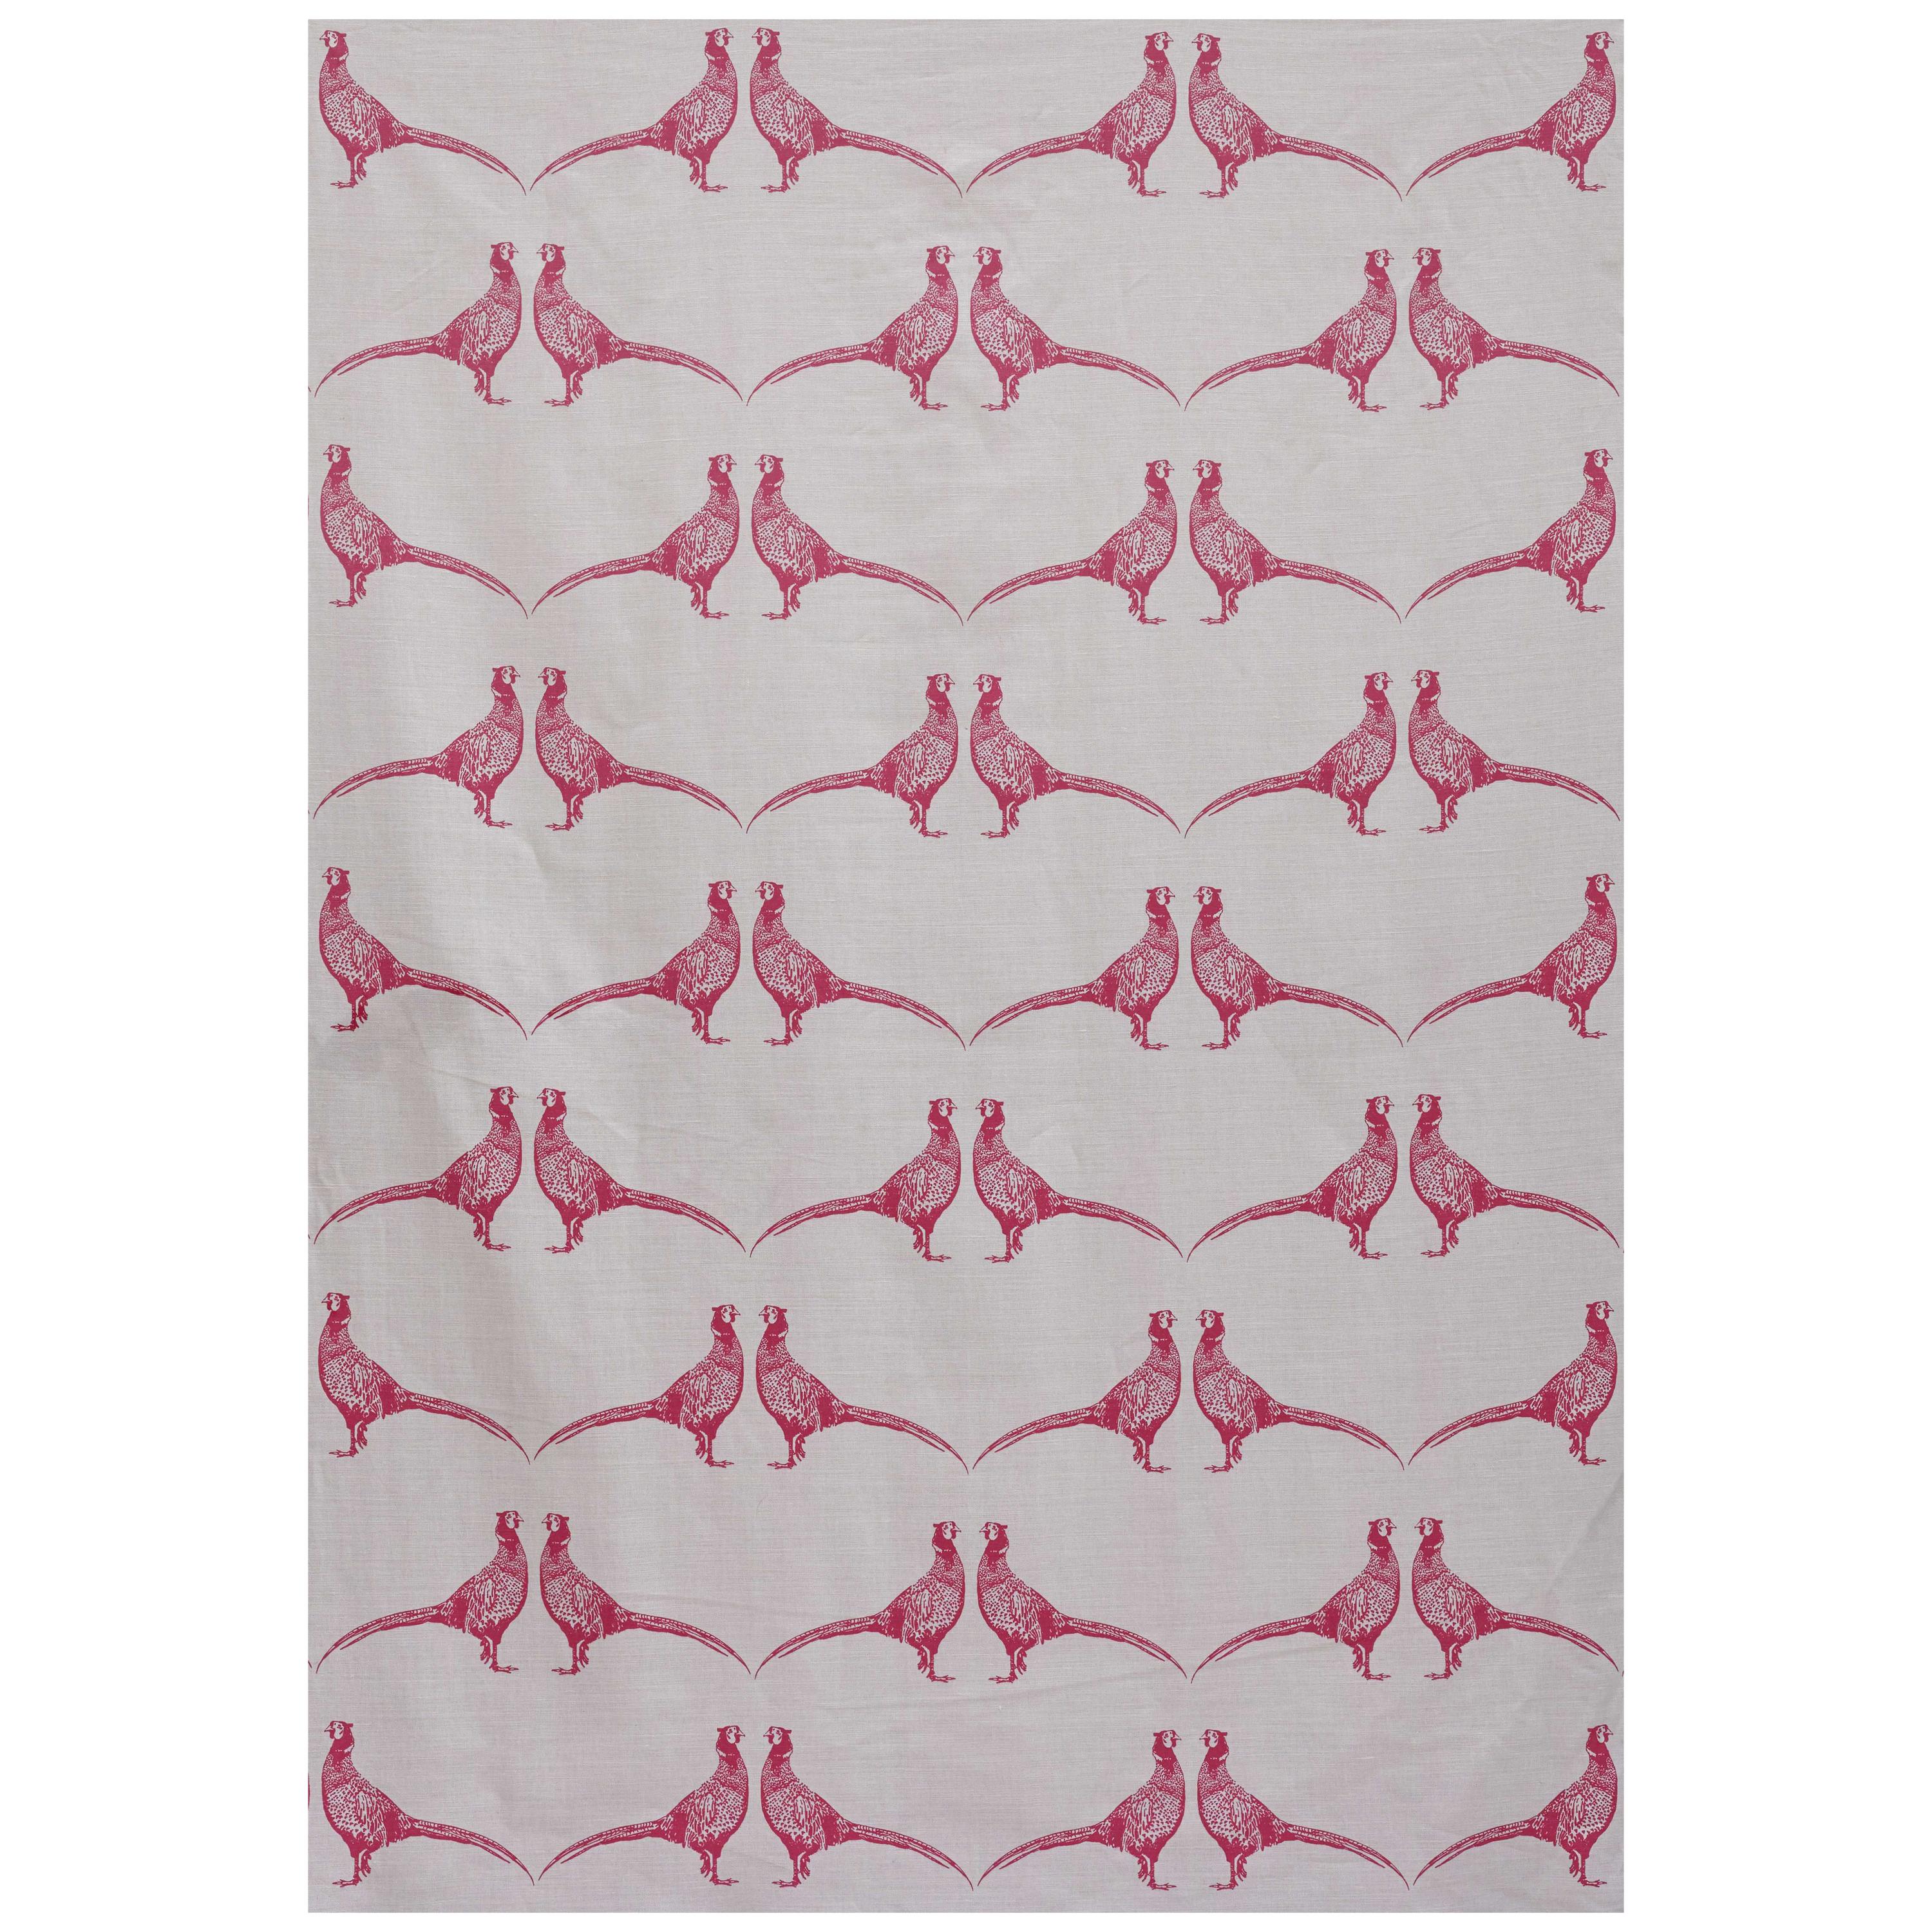 'Pheasant' Contemporary, Traditional Fabric in Pink on Cream For Sale